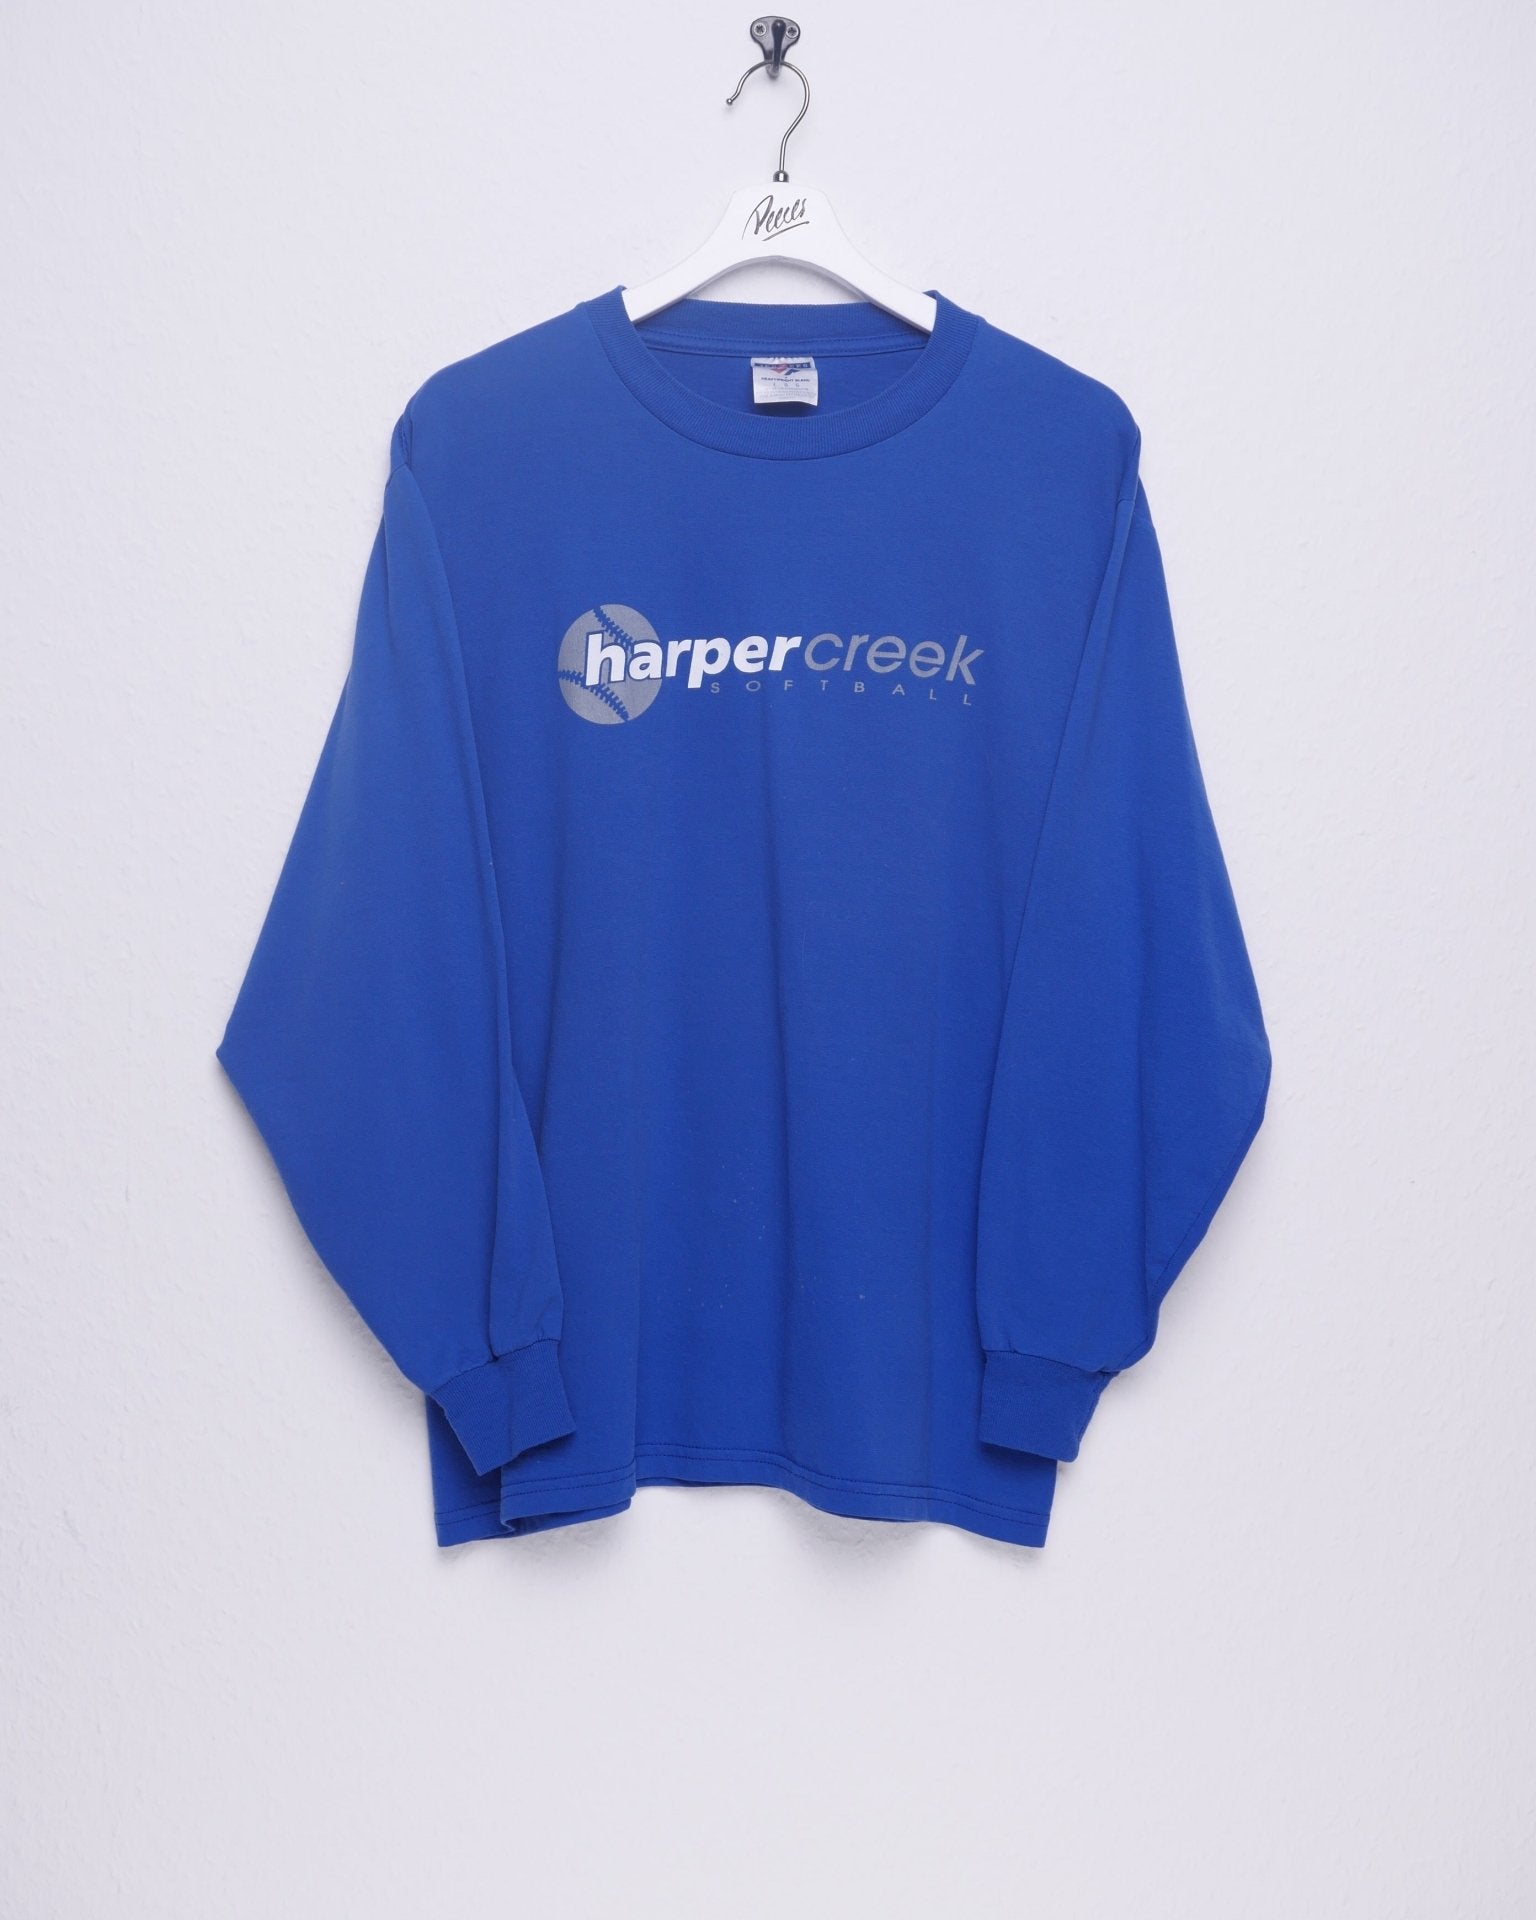 printed Spellout blue L/S Shirt - Peeces